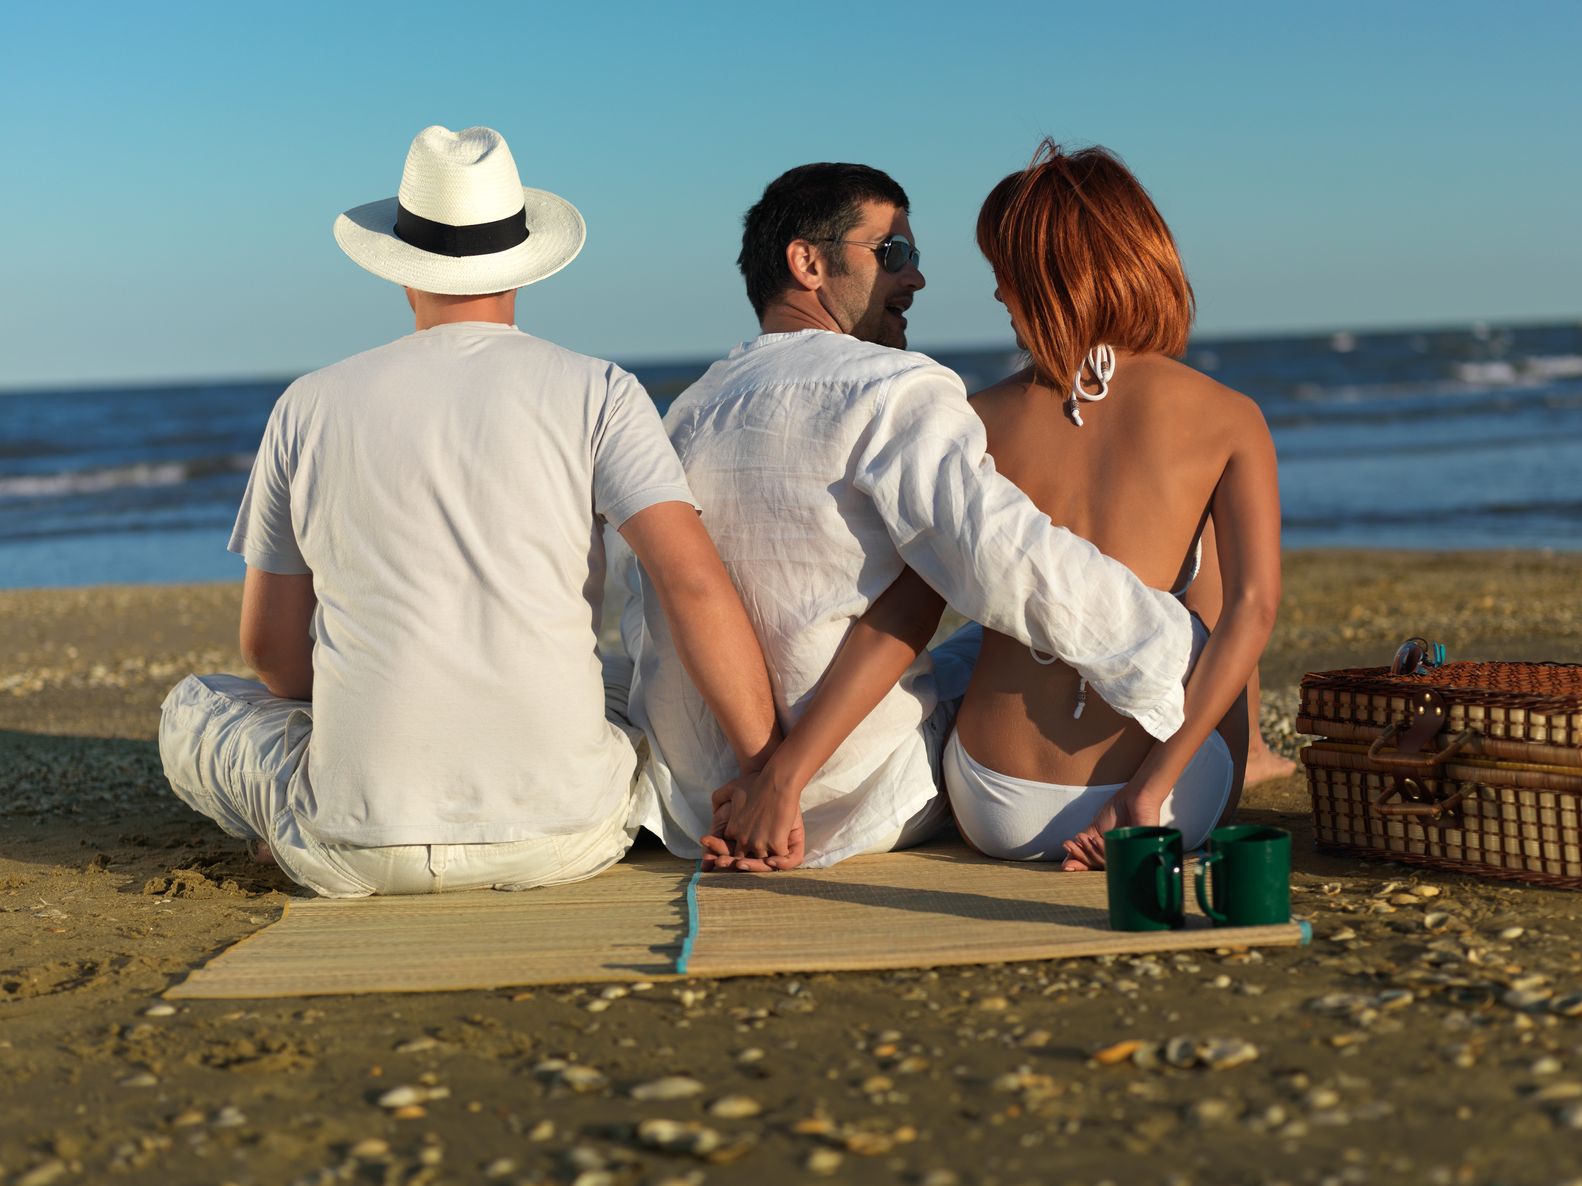 16038750 - young woman talking with the boyfriend, while holding hands with another man, at a picnic by the sea shore